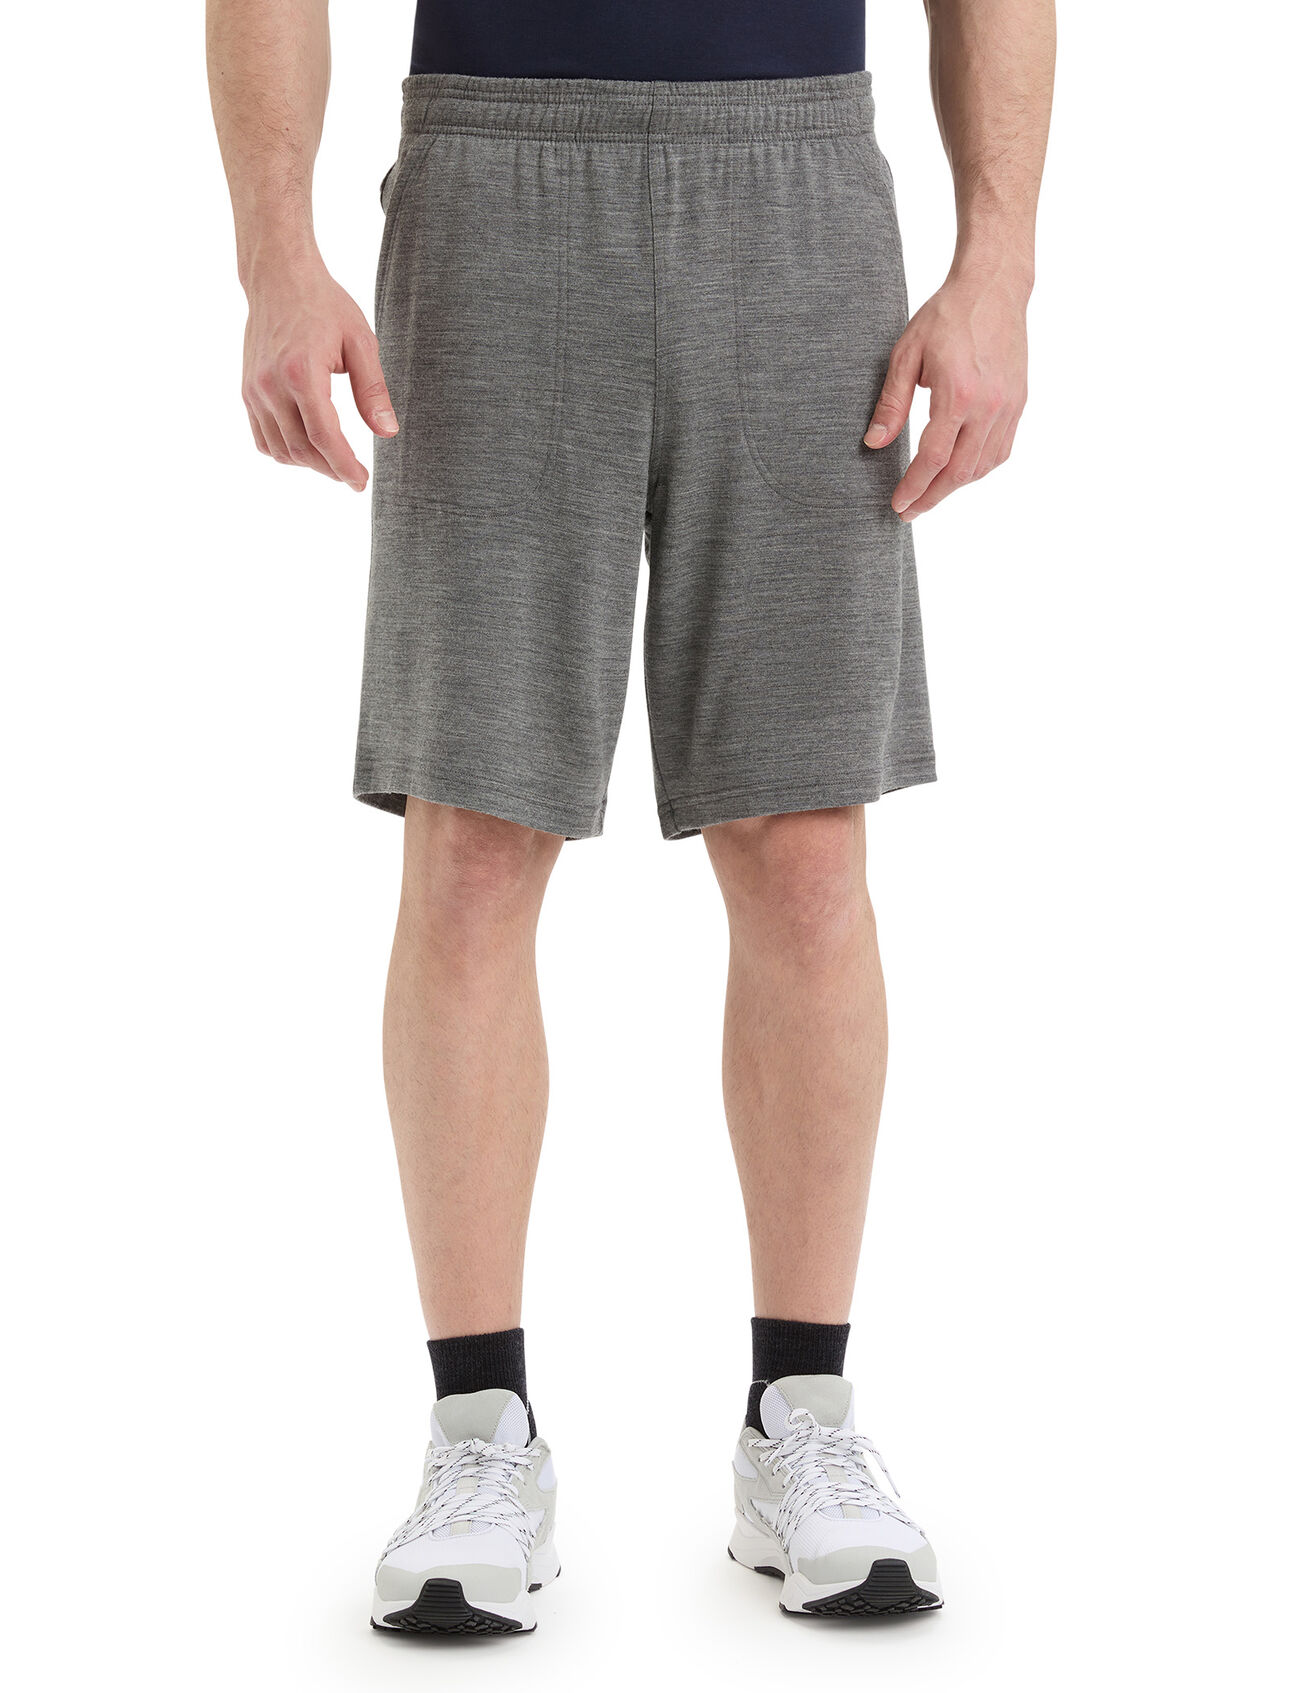 Mens Merino Shifter Shorts Classic sweat shorts with a modern twist thanks to soft, 100% merino wool terry fabric, the Shifter Shorts are styled and dialed for everyday comfort.